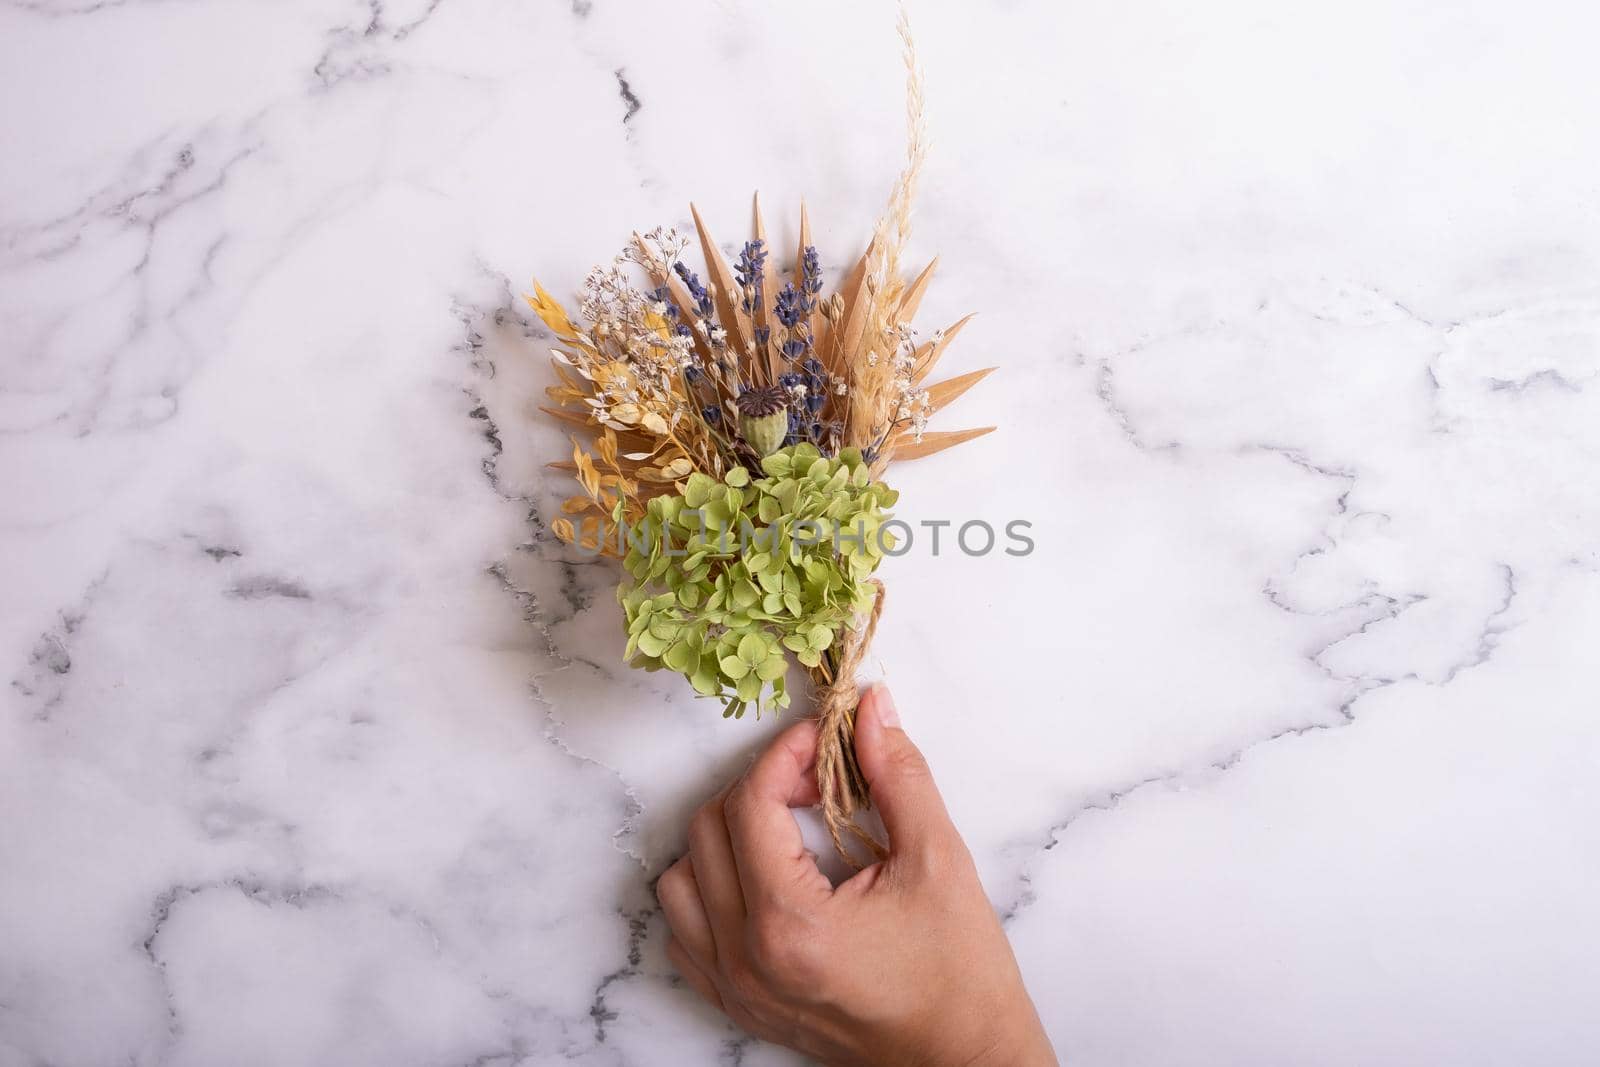 A bouquet of dry flowers and herbs in a woman's hand on a marble background by ssvimaliss